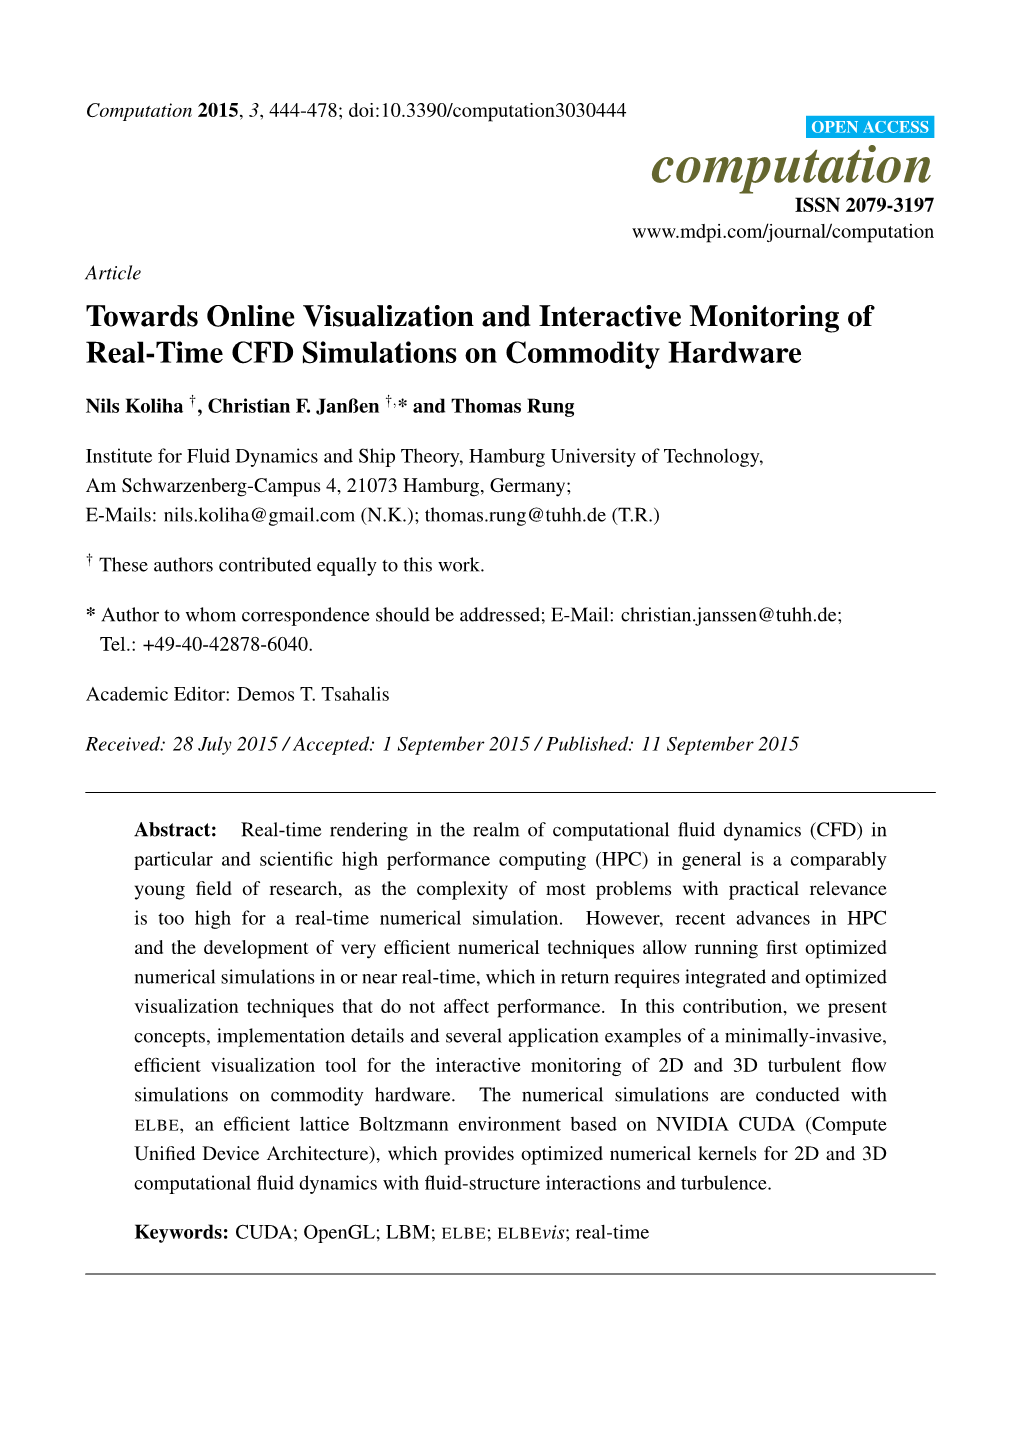 Towards Online Visualization and Interactive Monitoring of Real-Time CFD Simulations on Commodity Hardware